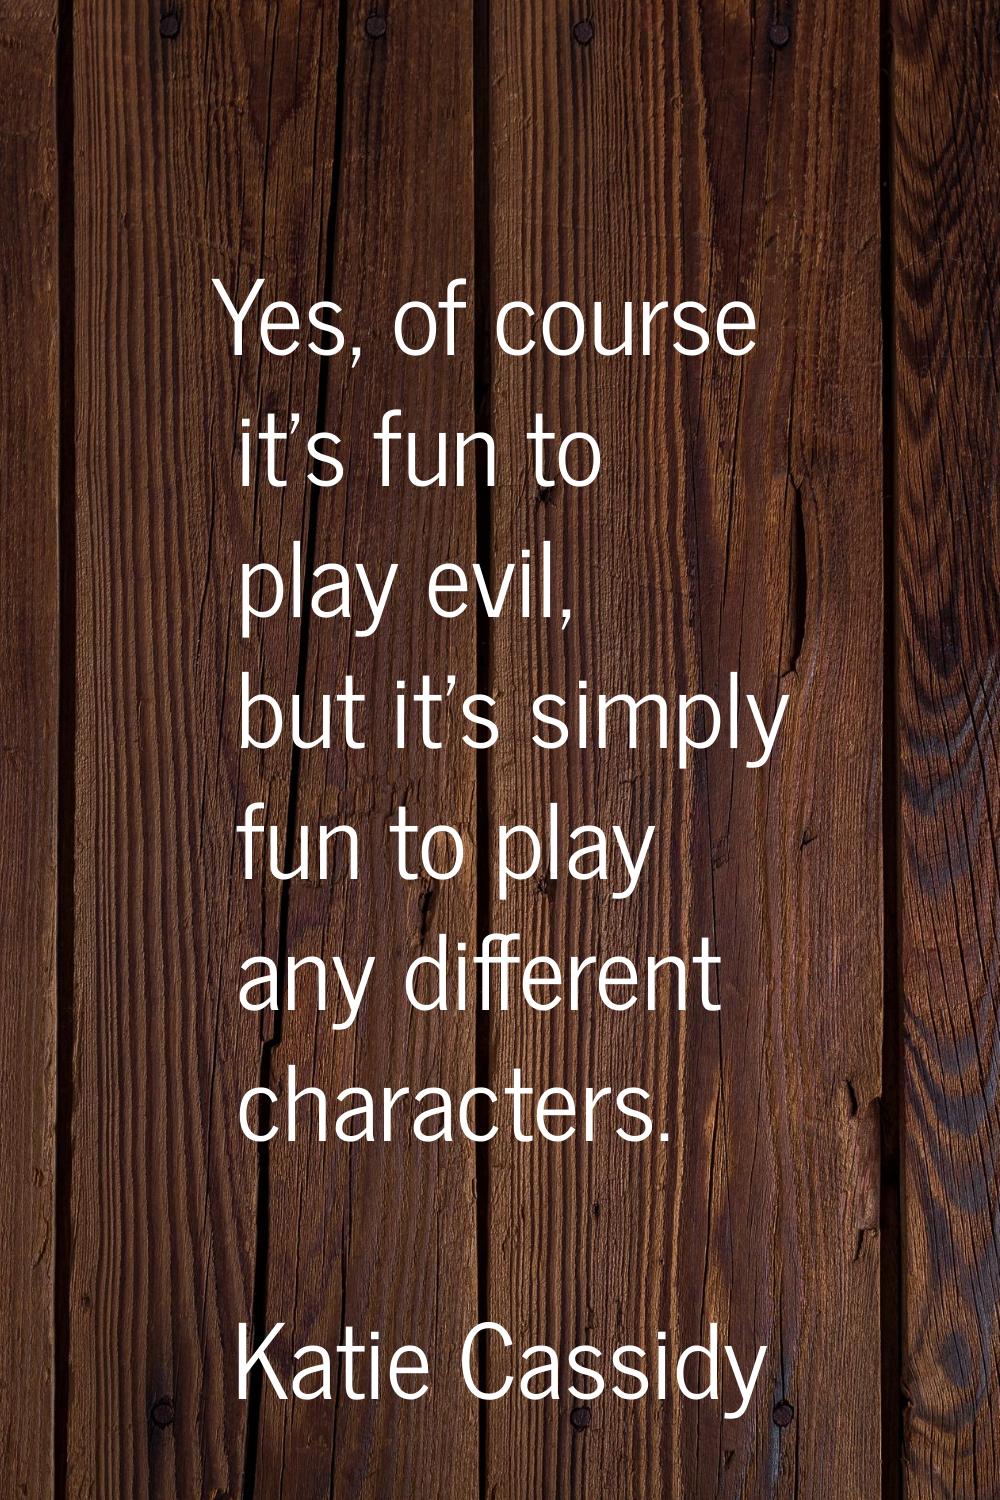 Yes, of course it's fun to play evil, but it's simply fun to play any different characters.